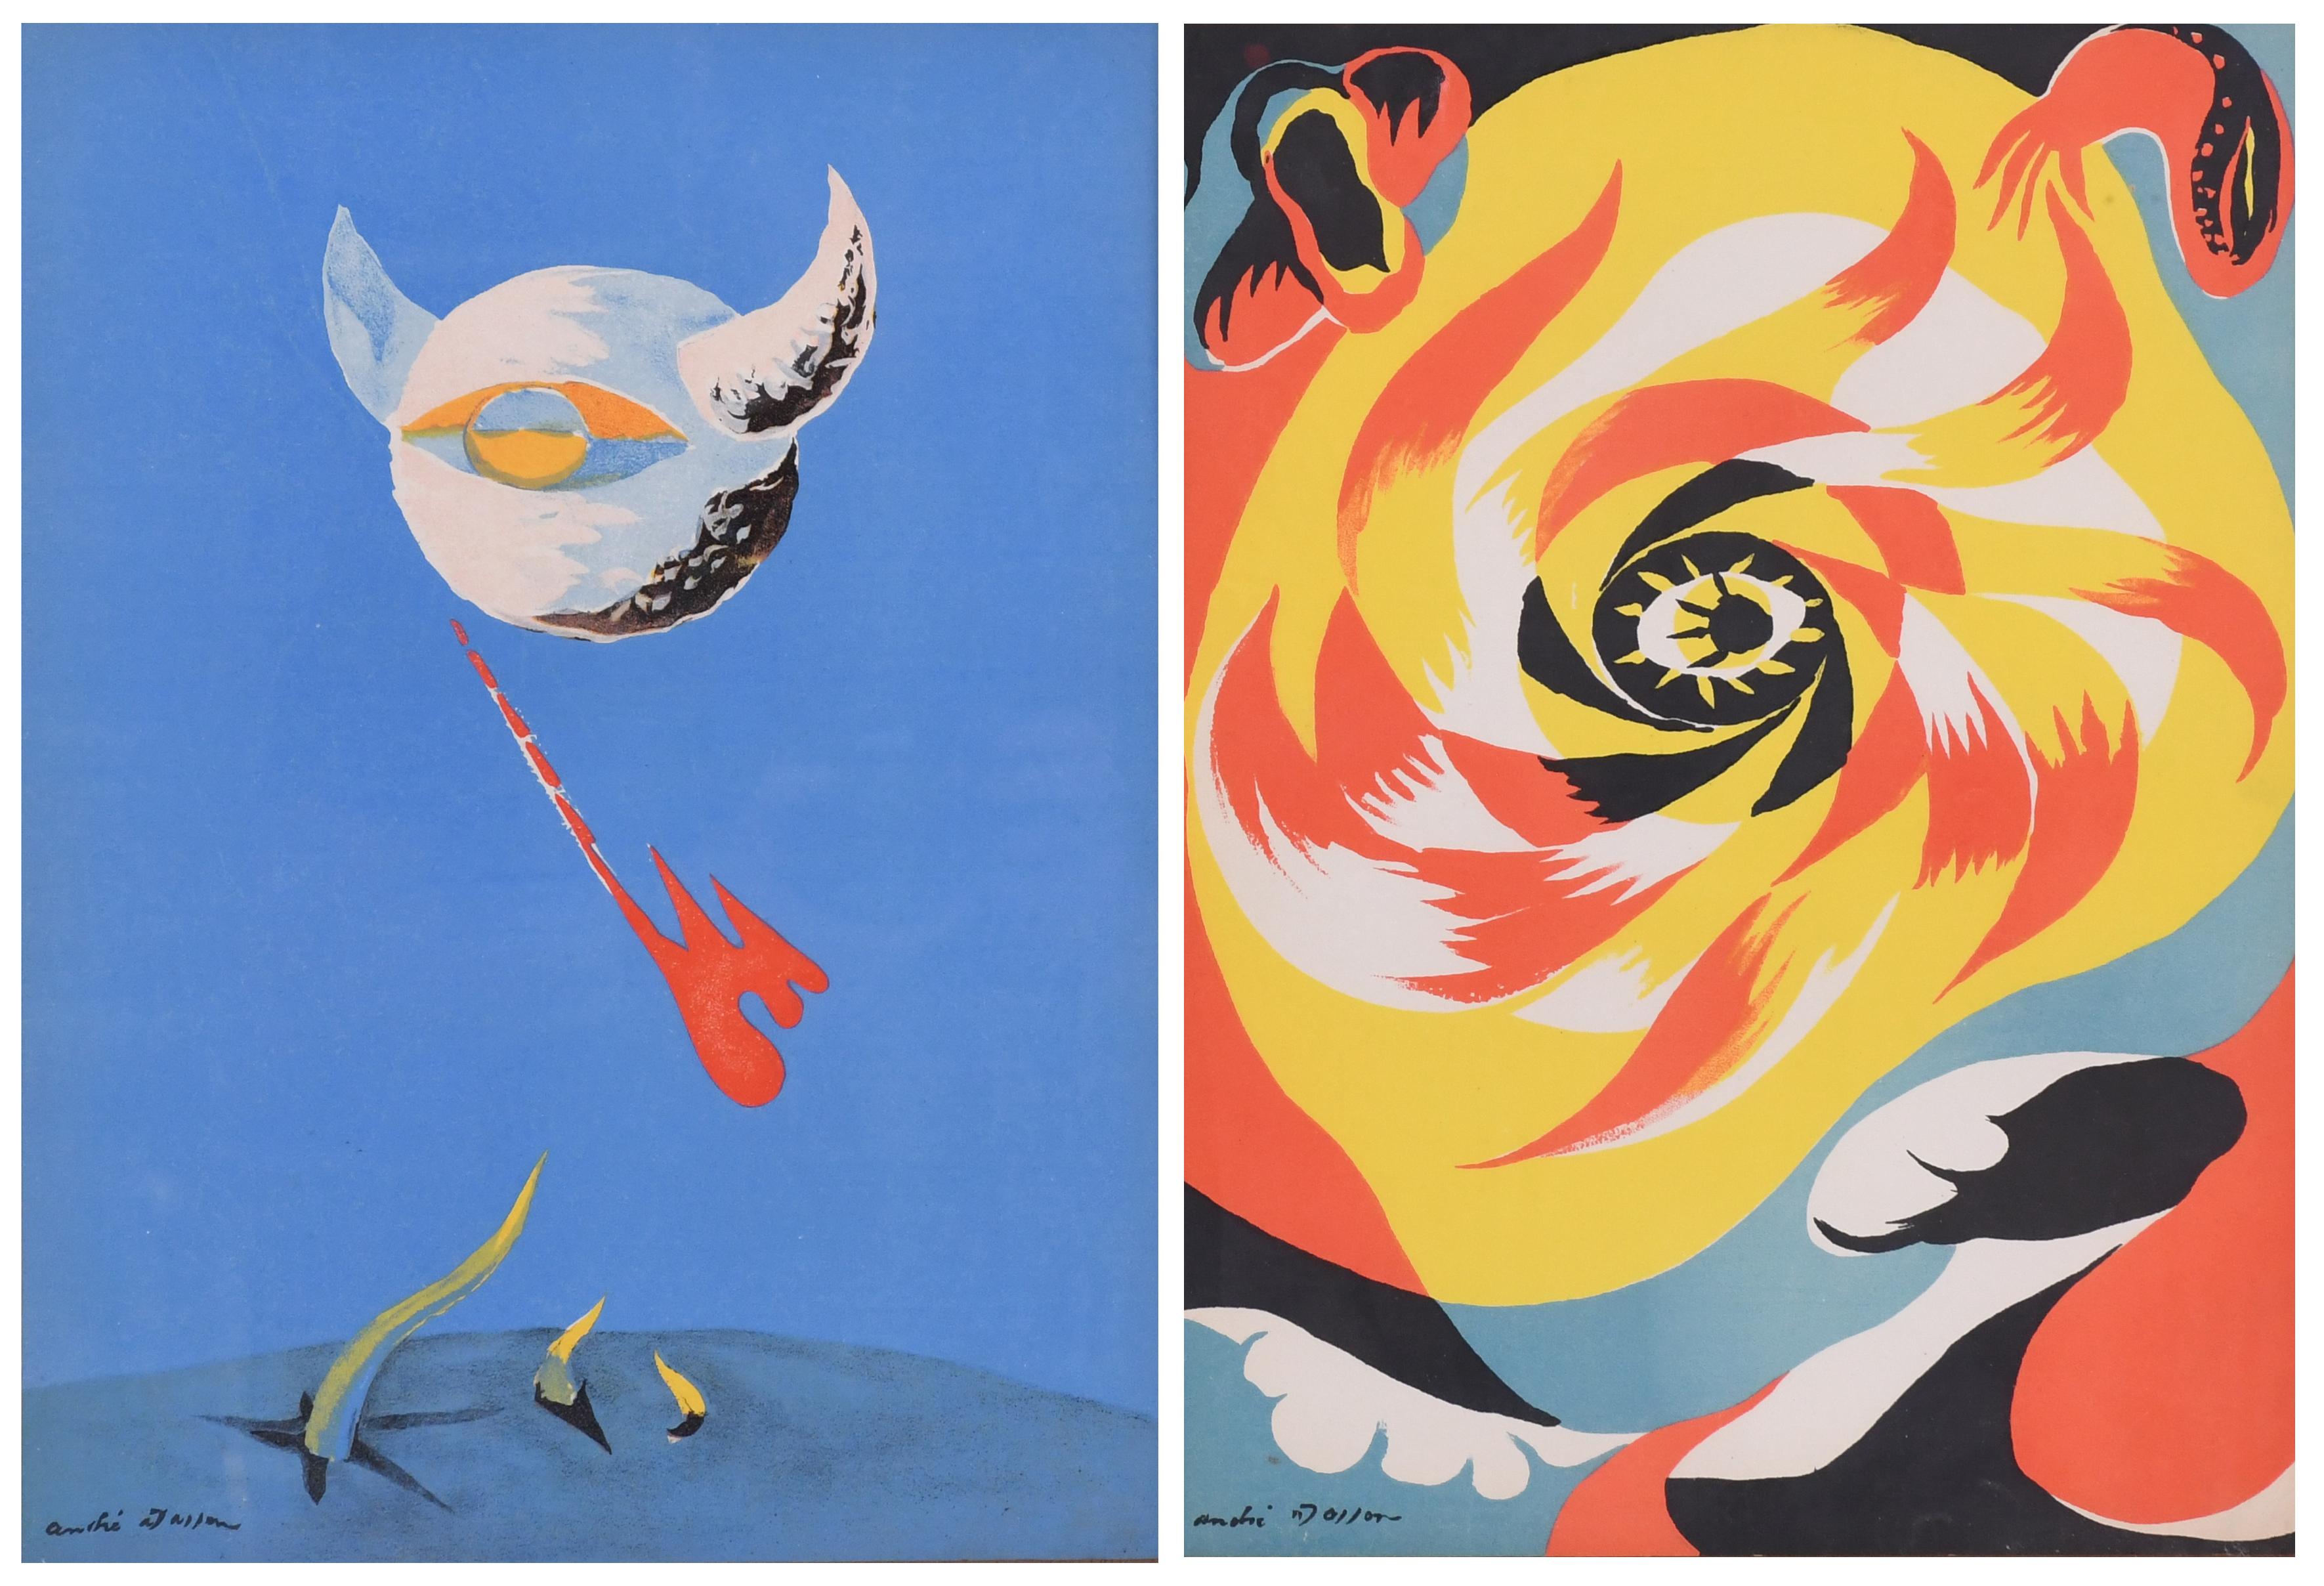 ANDRÉ MASSON (1896-1987).  "THE MOON" and "THE SUN".